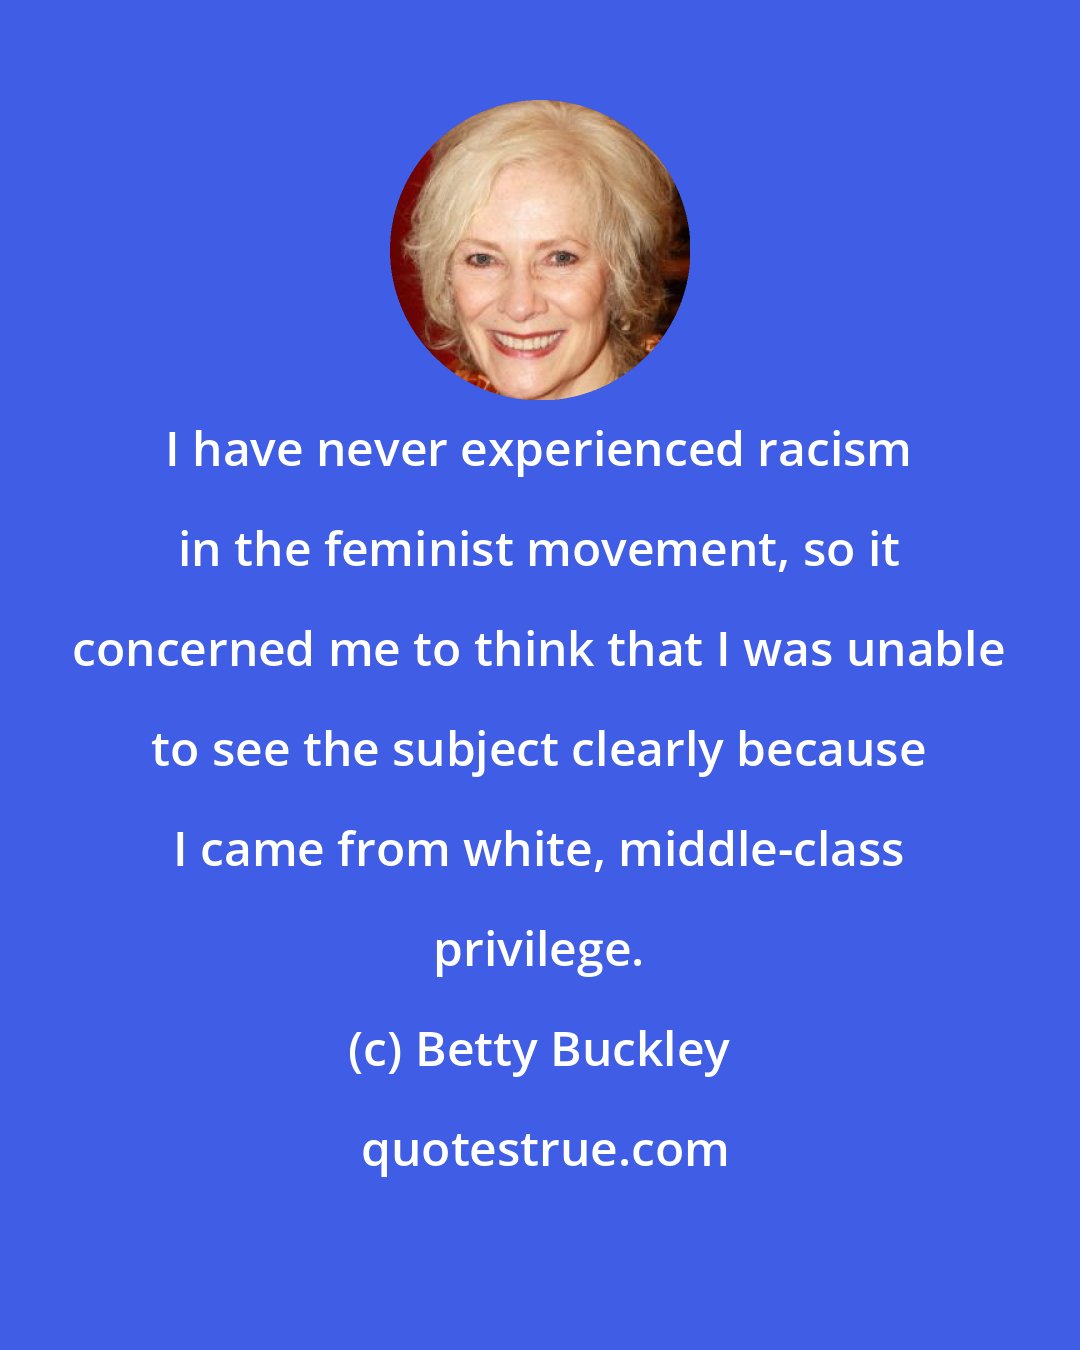 Betty Buckley: I have never experienced racism in the feminist movement, so it concerned me to think that I was unable to see the subject clearly because I came from white, middle-class privilege.